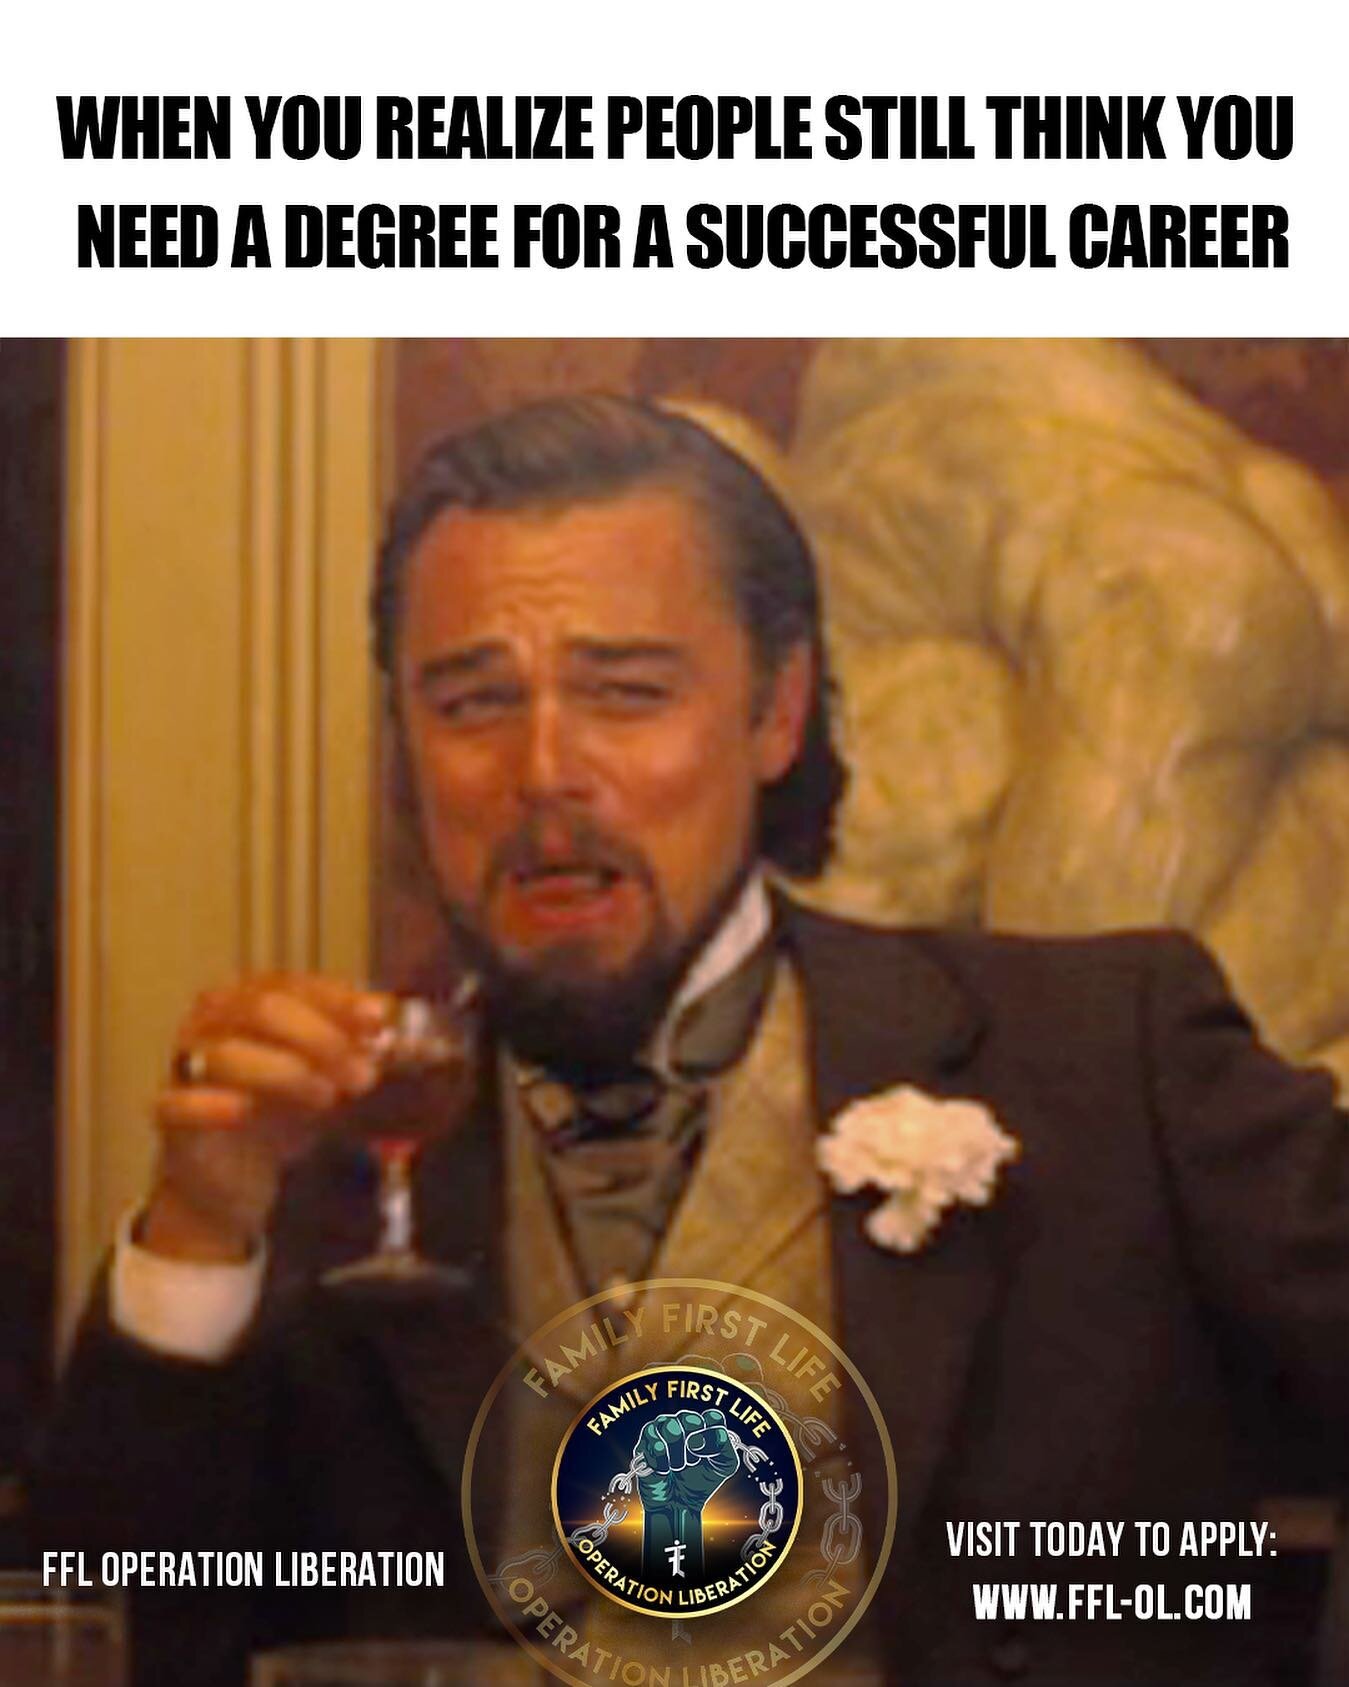 Our agency proof that you don&rsquo;t need a degree to have a successful career 🏆

 - Message us today about joining our team 🤝
.
Message us today for serious inquiries about joining the best team in the industry! 
.
.
Visit our site today: www.FFL